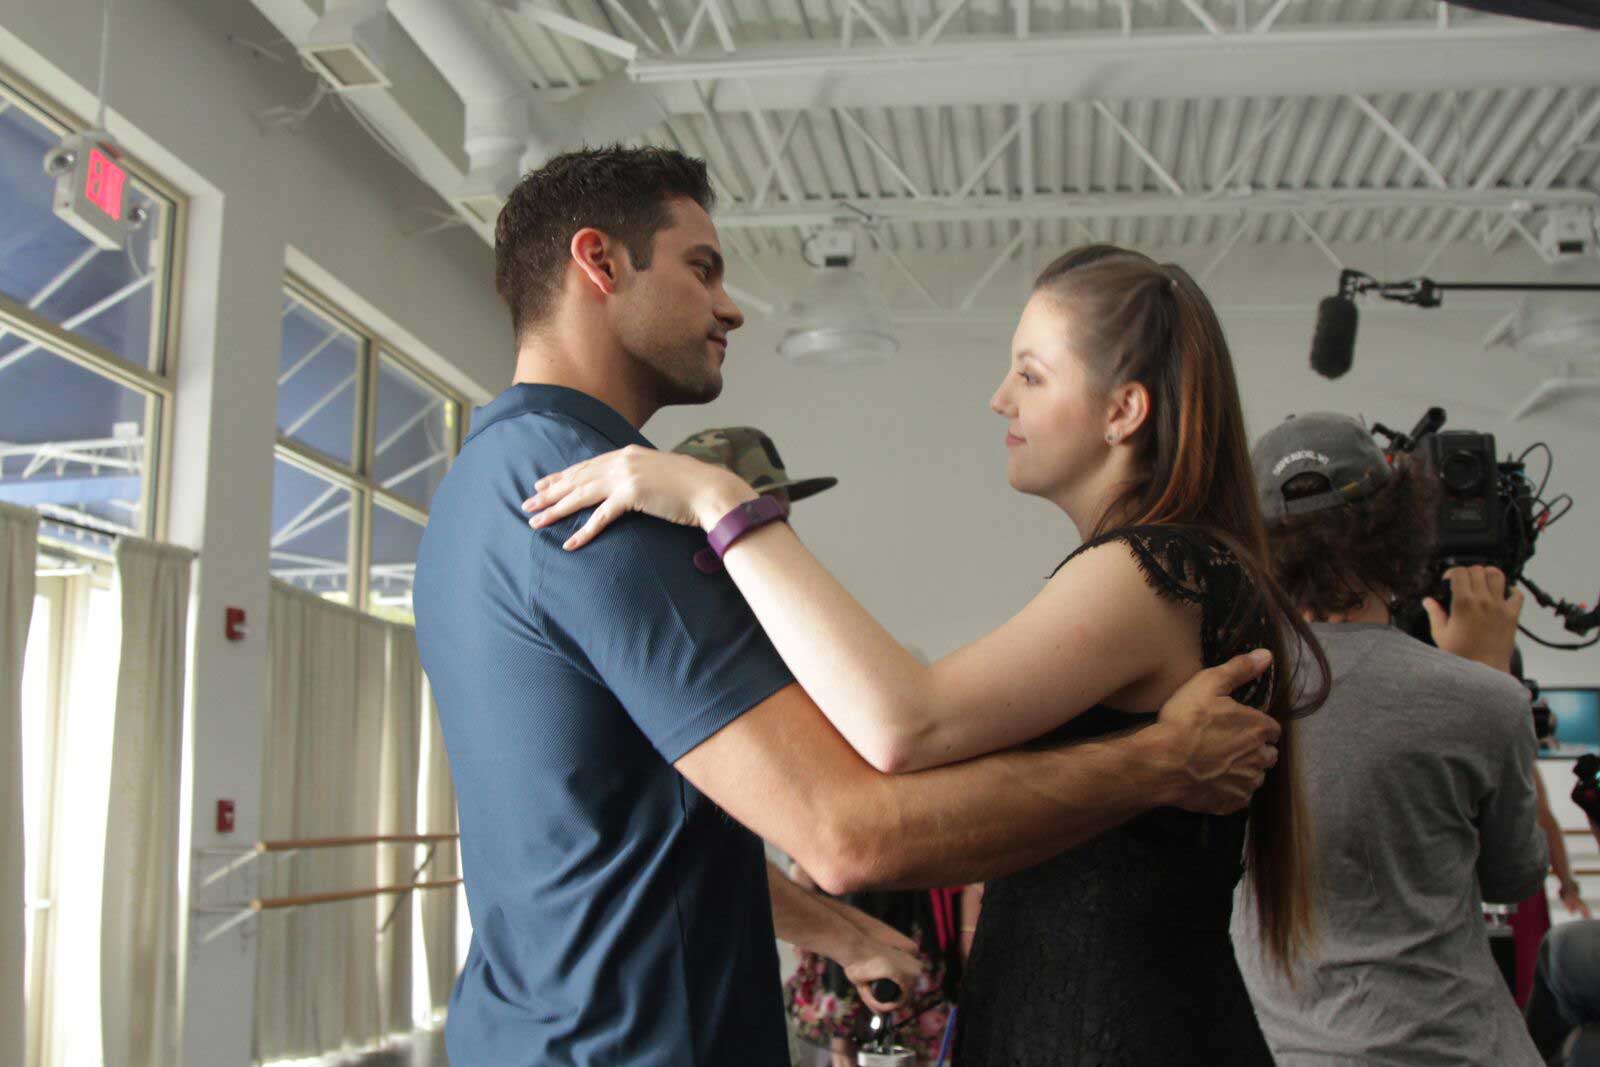 A behind-the-scenes look at one of the film’s dance sequences. This was filmed at a real life studio that has a non-profit program for community performances. Local dancers were featured in the film.